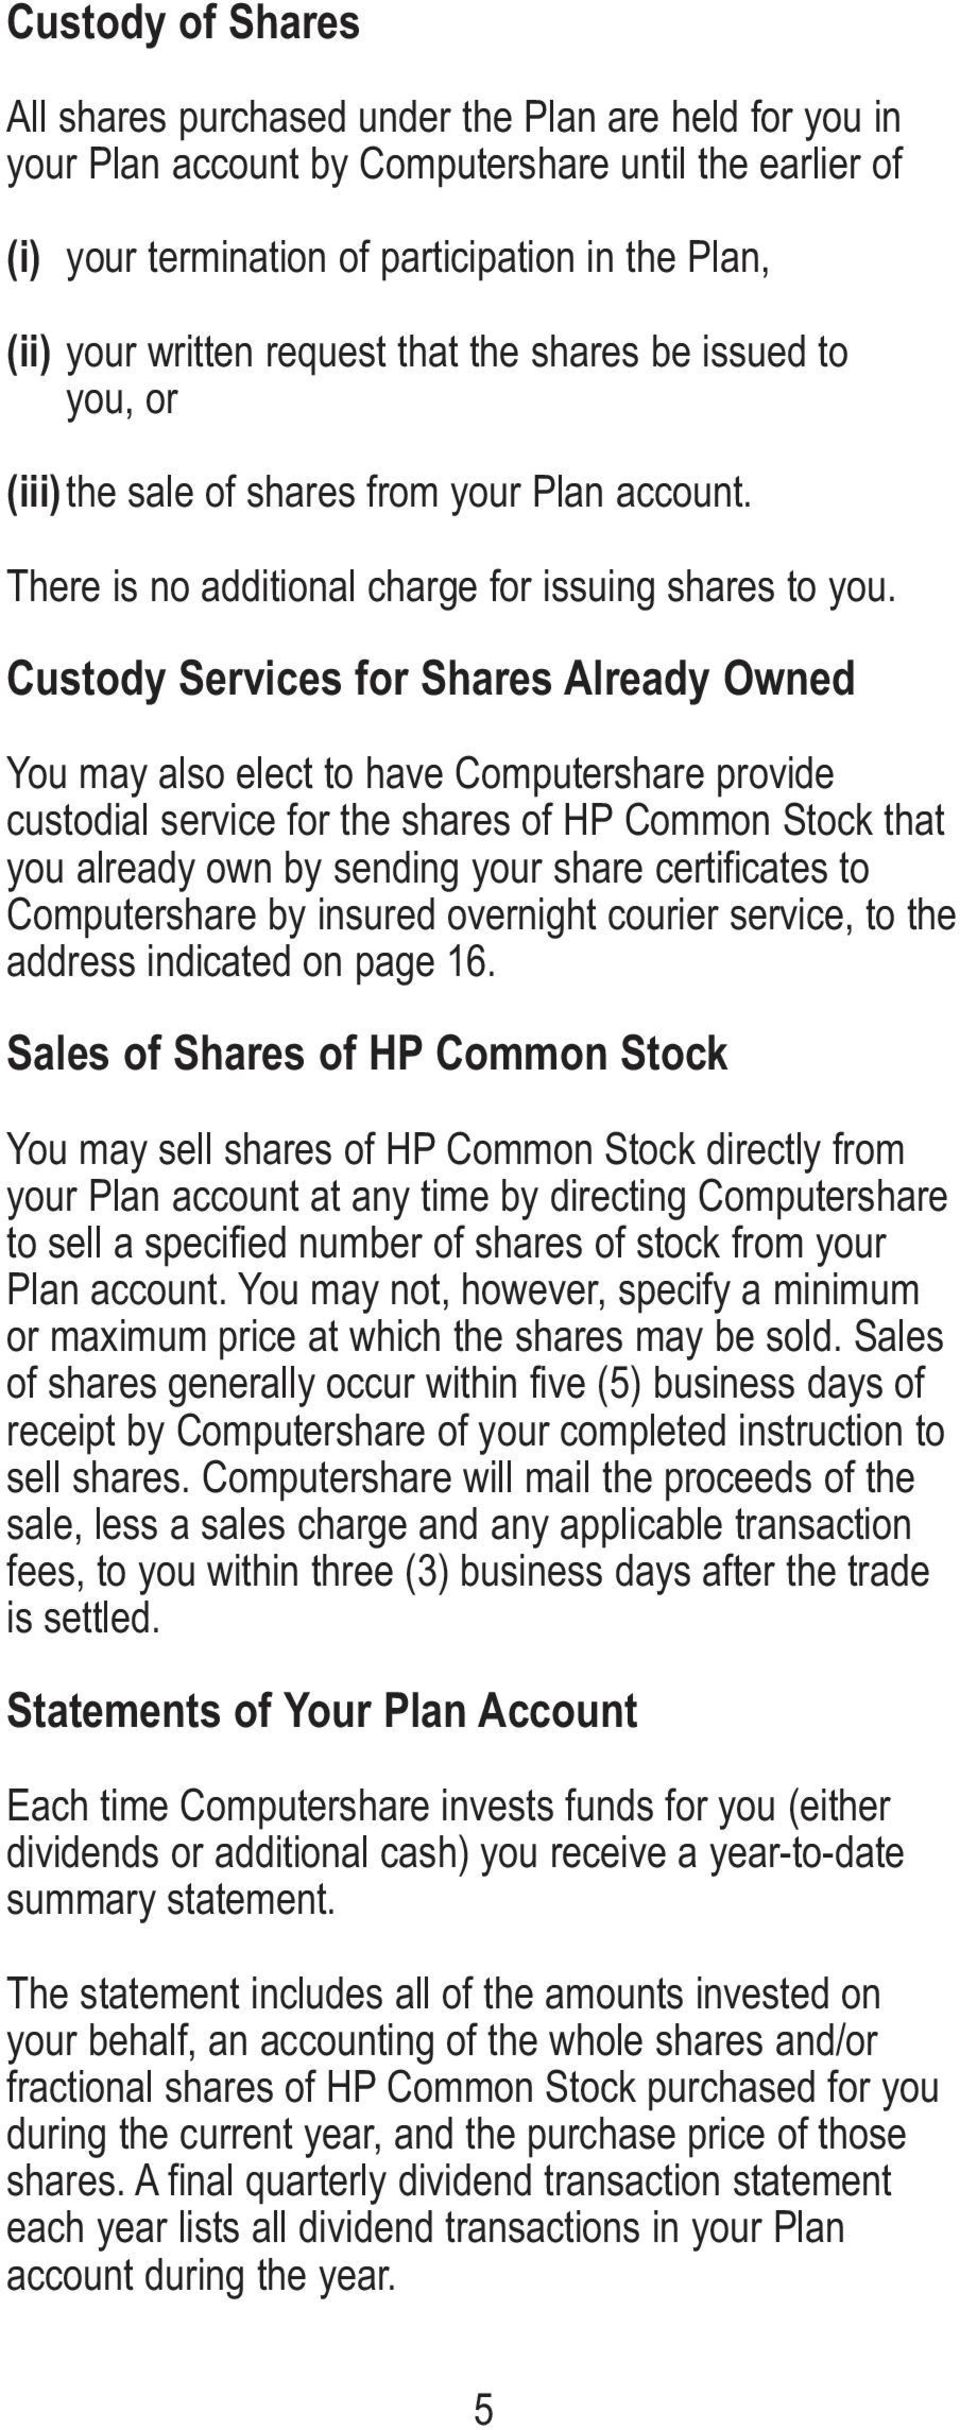 Custody Services for Shares Already Owned You may also elect to have Computershare provide custodial service for the shares of HP Common Stock that you already own by sending your share certificates